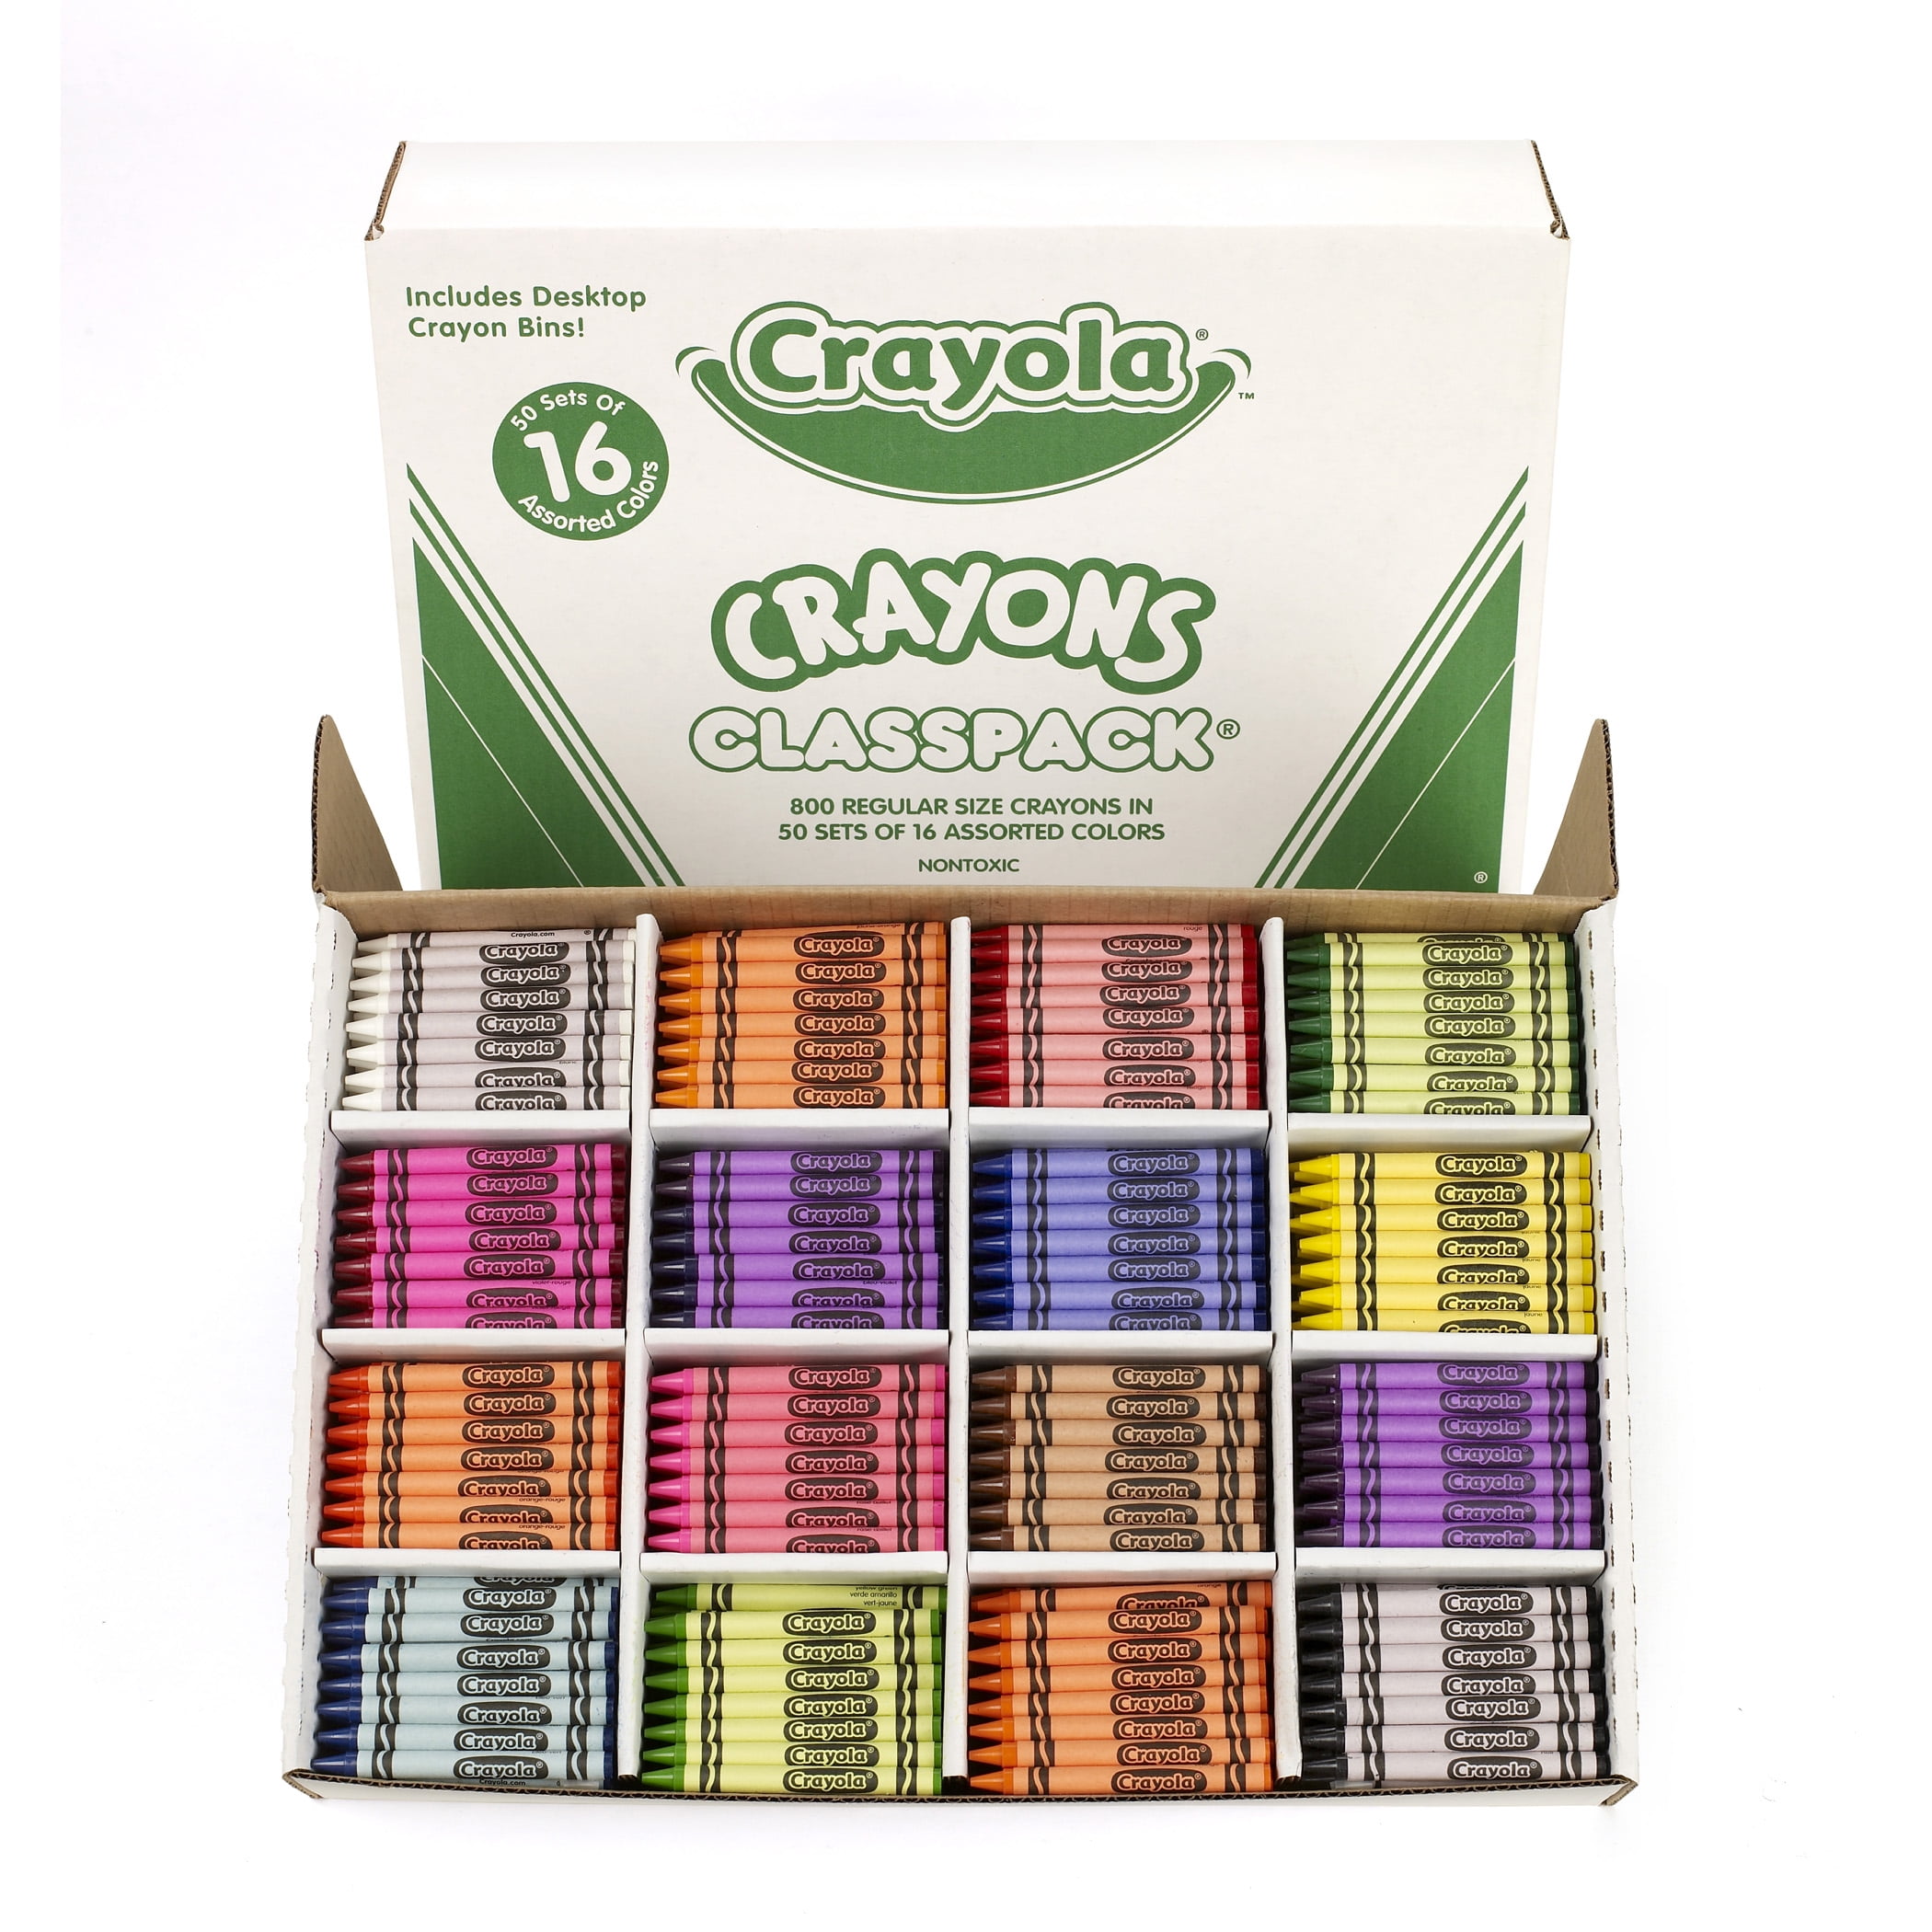 Non Toxic Crayons Crayons glide easily Colorations® Large Crayon Classpack Kids Crayons Set of 400 Larger size is Easier to Grip 8 Assorted Colors Hold & Draw 50 of Each 